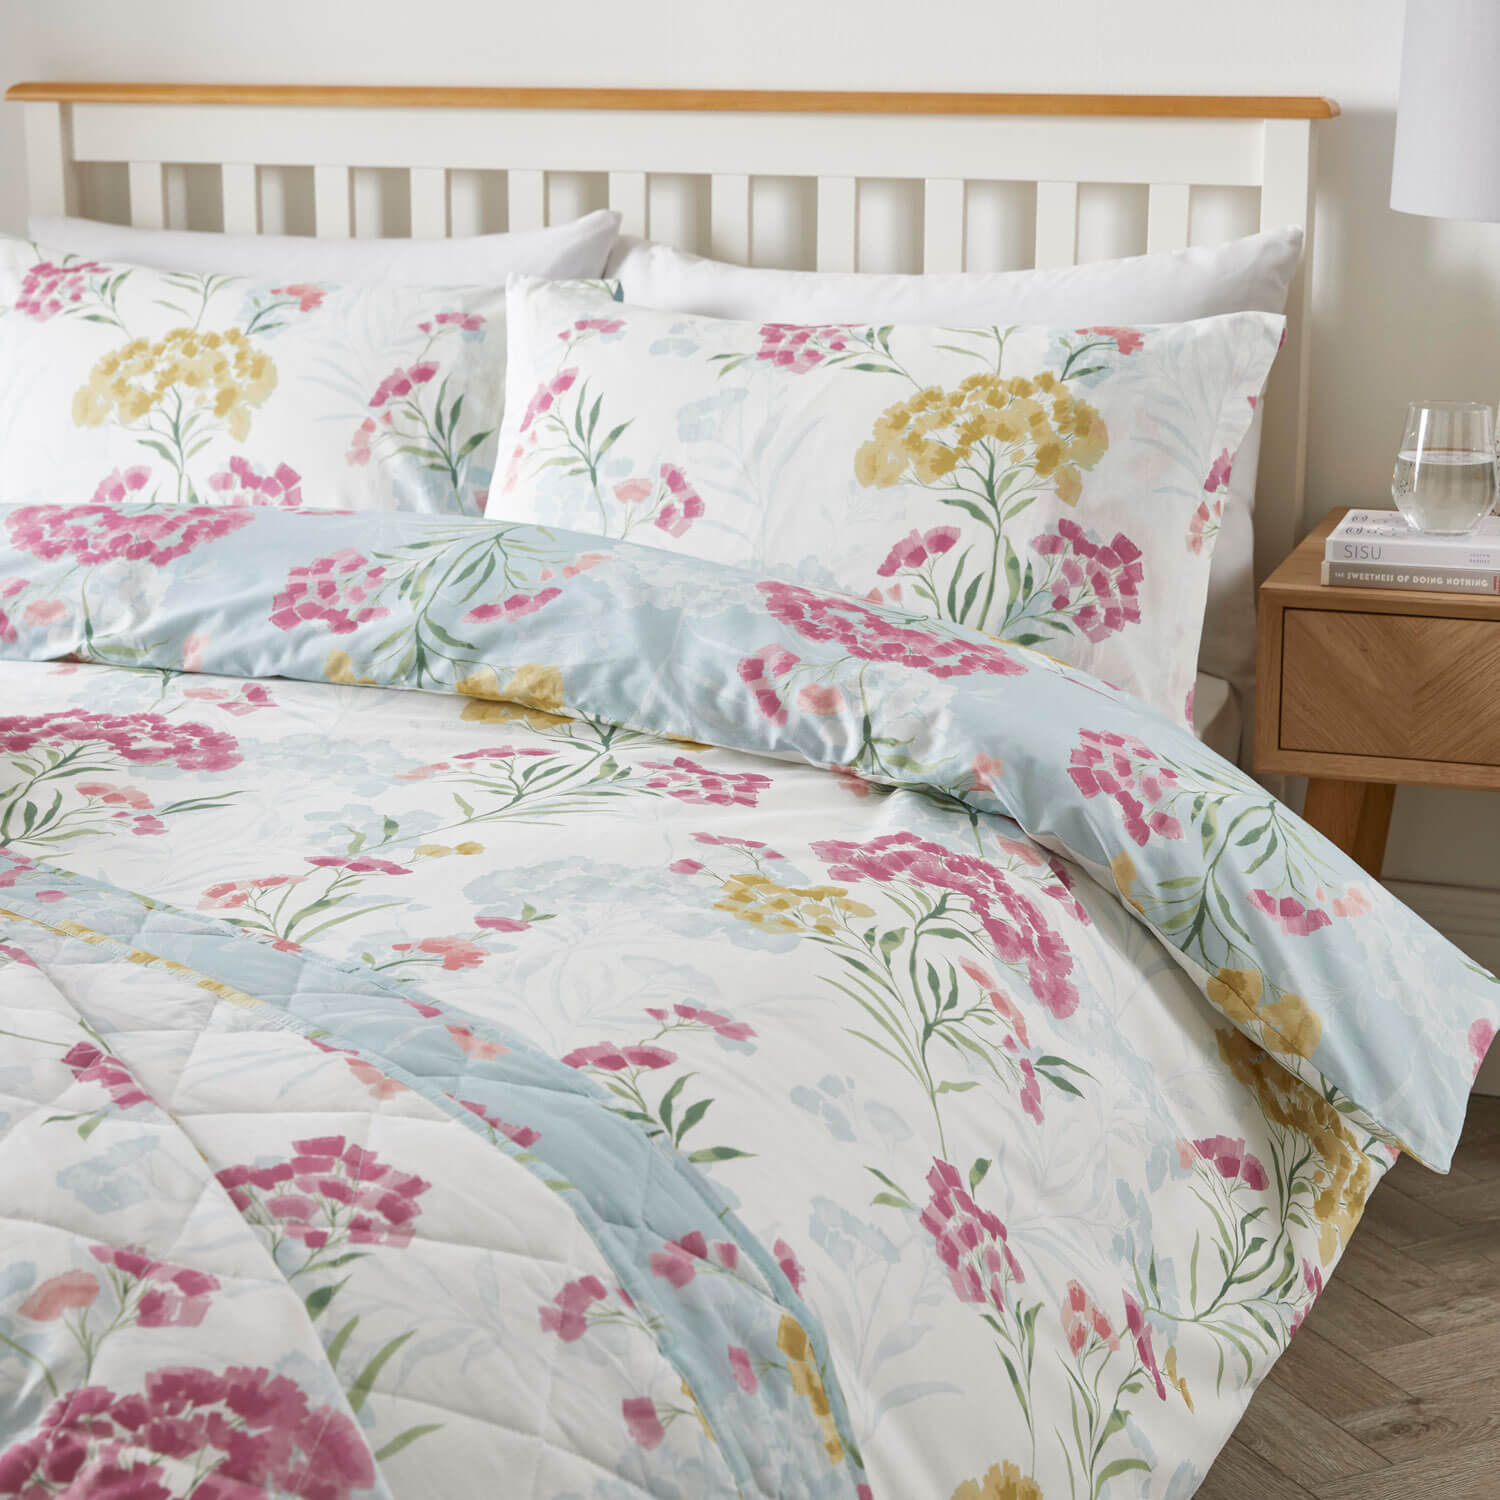  The Home Collection Isadora Duvet Set 1 Shaws Department Stores